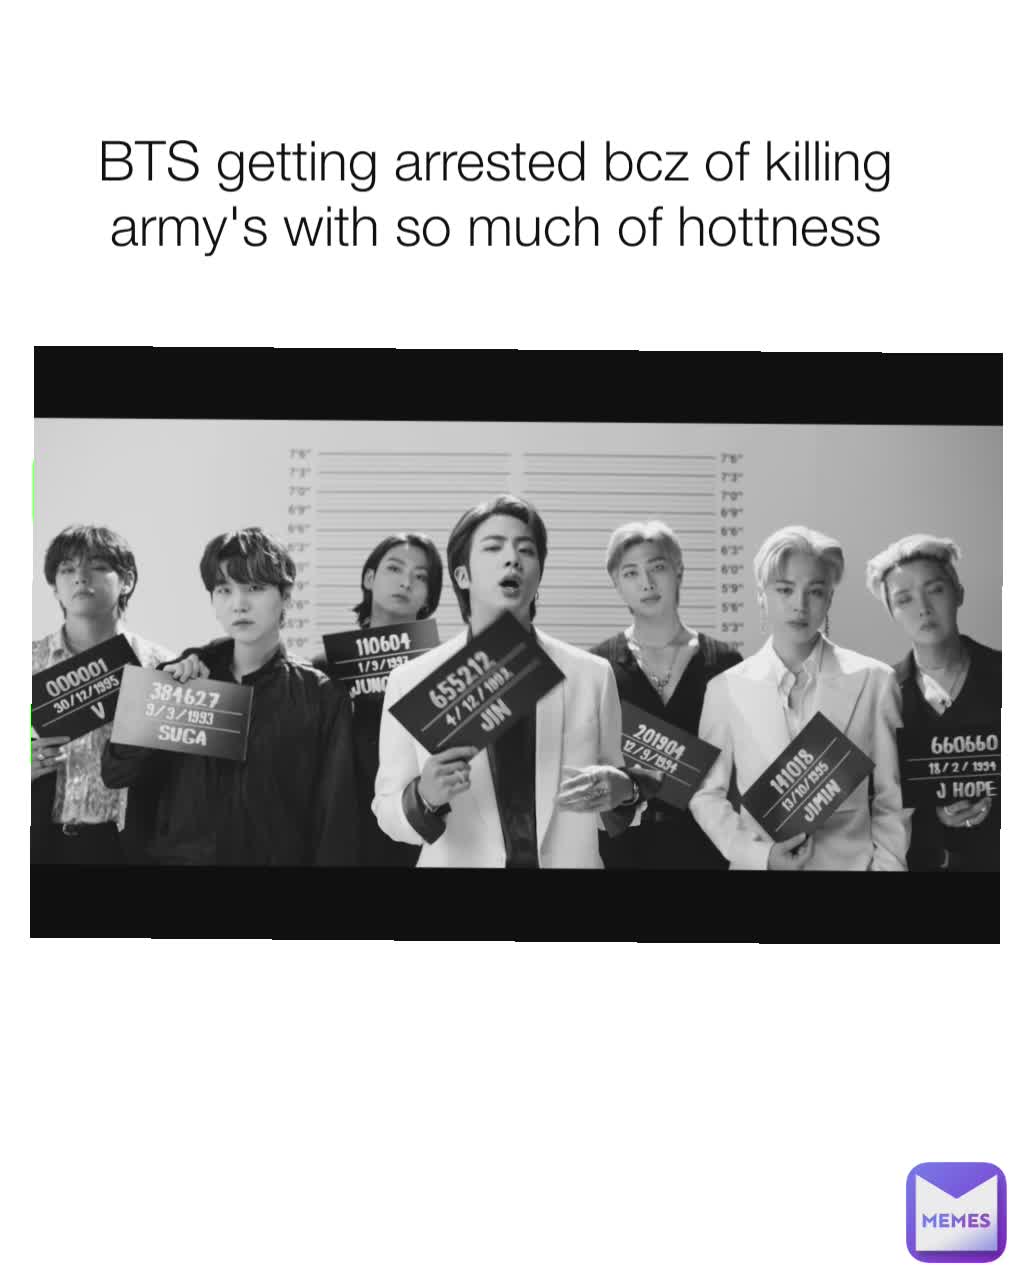 BTS getting arrested bcz of killing army's with so much of hottness